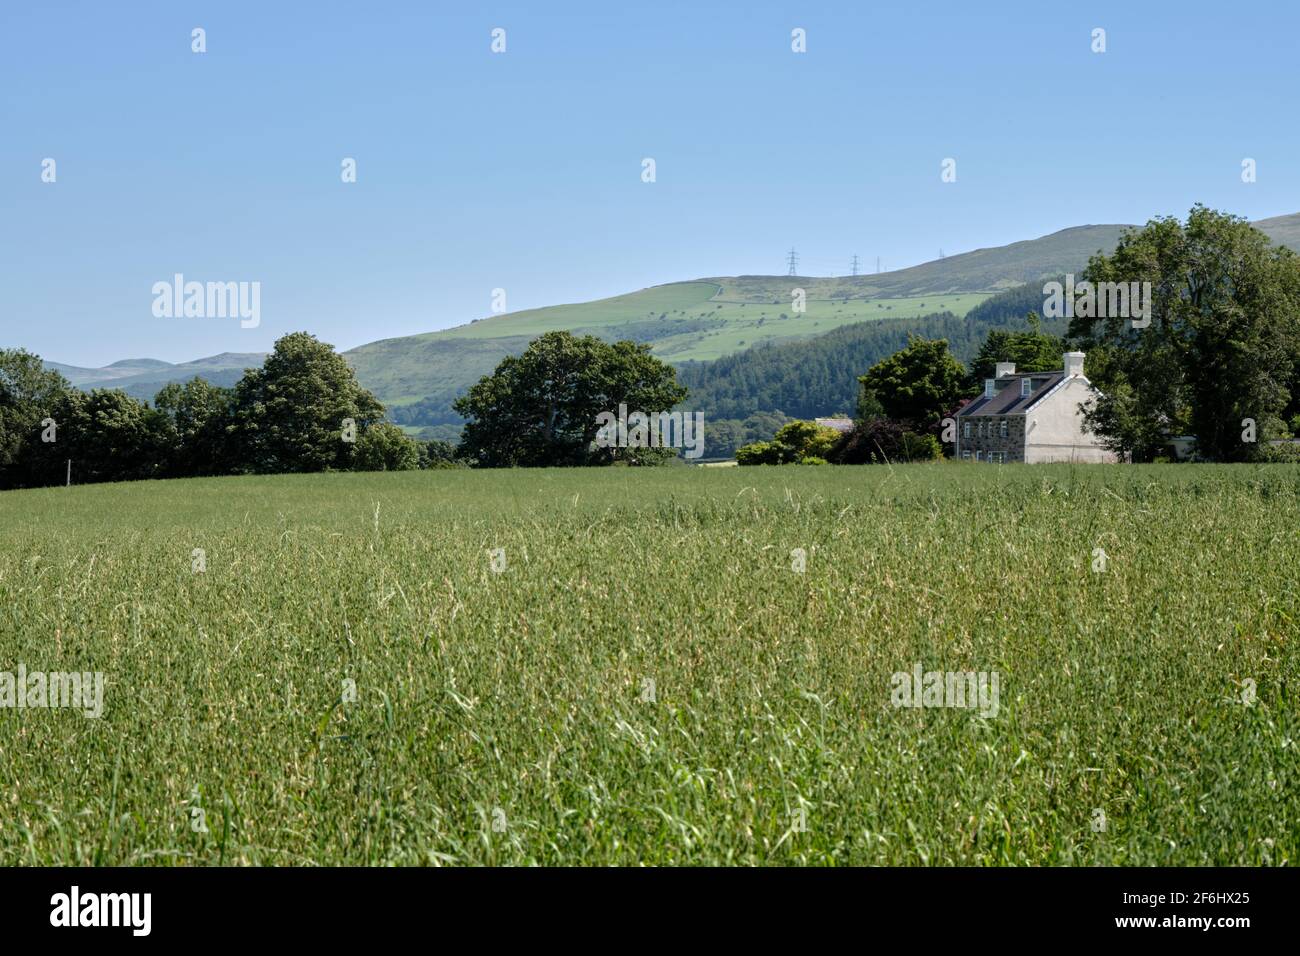 A remote farmhouse in an idyllic location on the hills surrounding Bangor, Wales Stock Photo